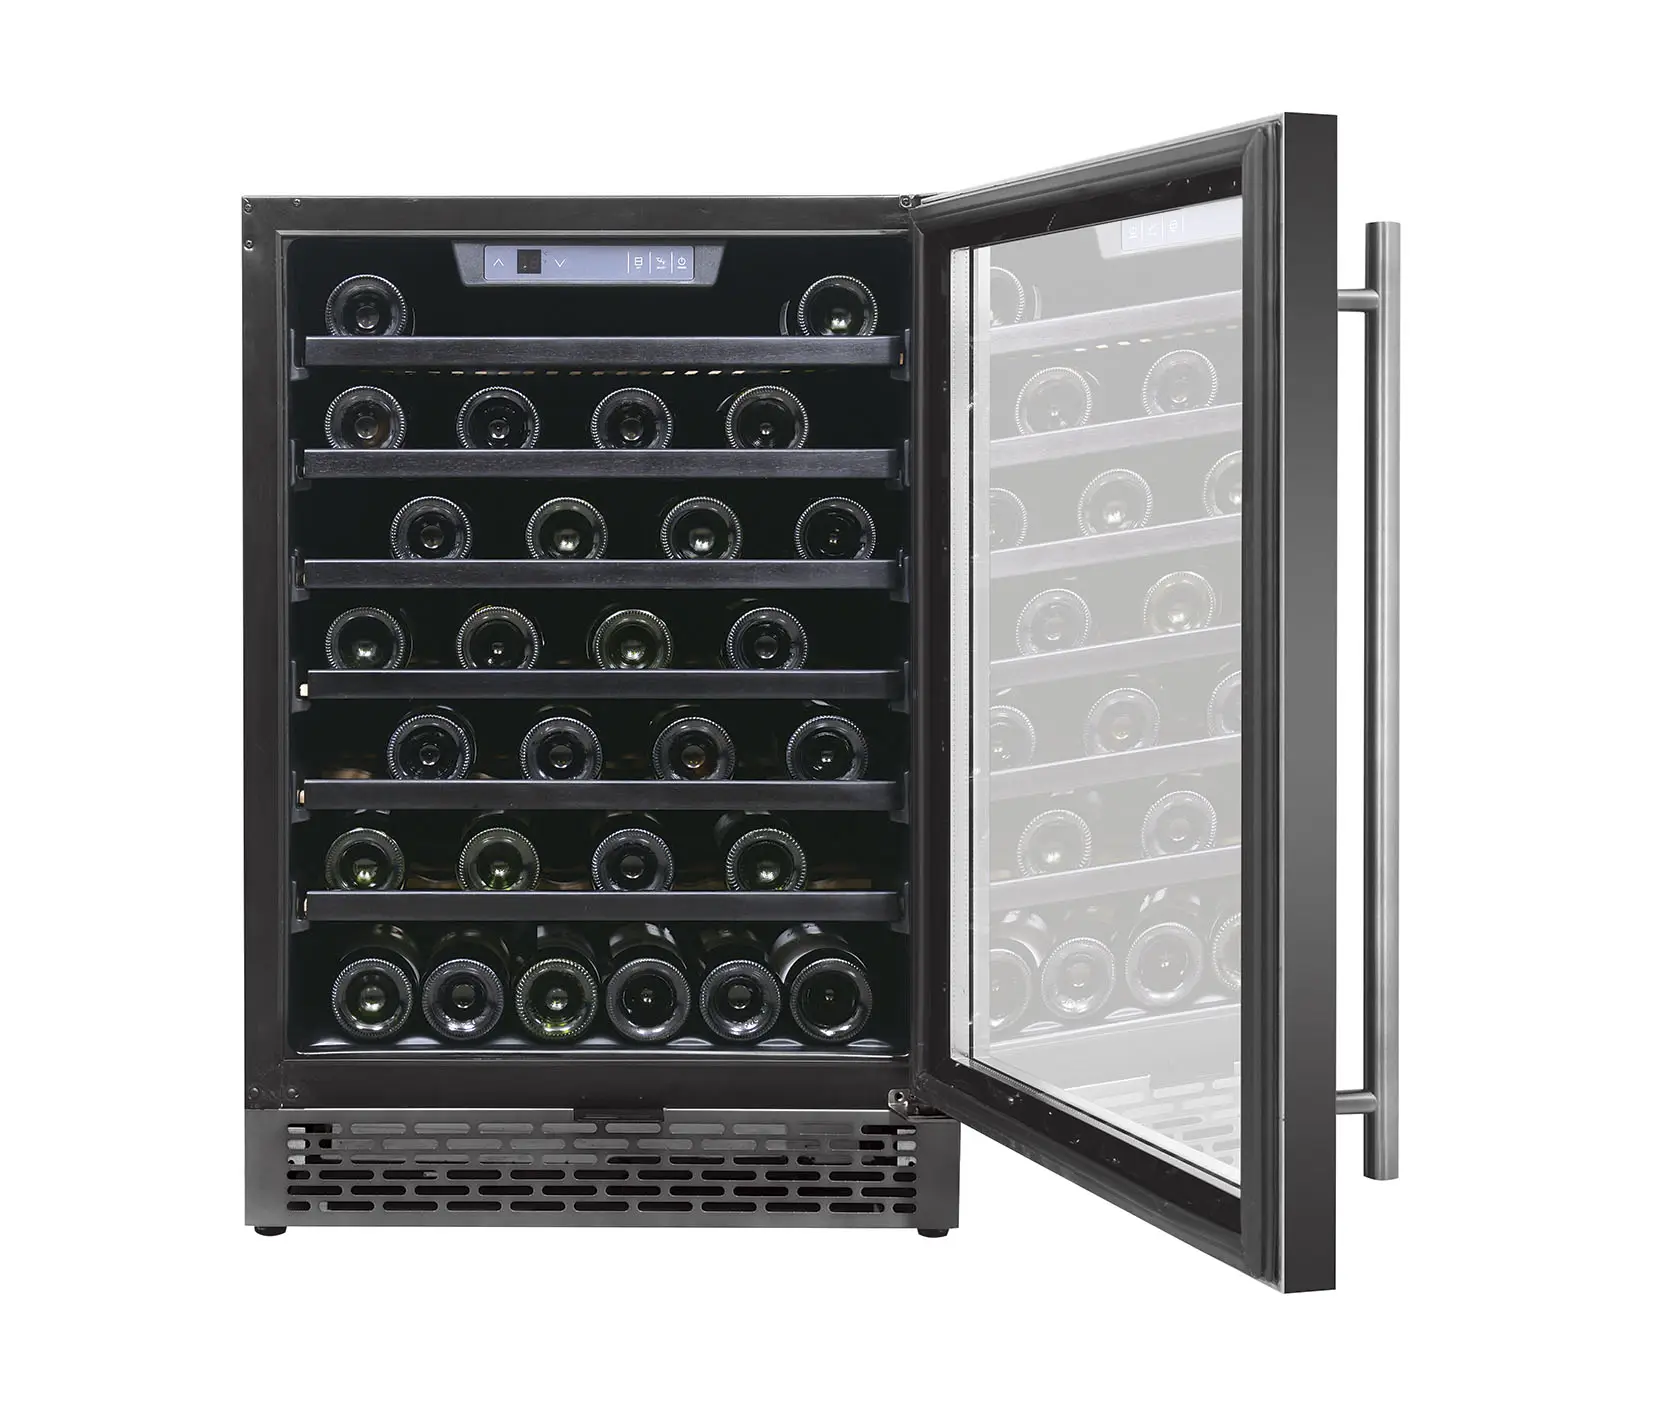 60L Dual zone wine cooler with glass door bodegas under counter wine fridge small cellar mini cave for home office hotel